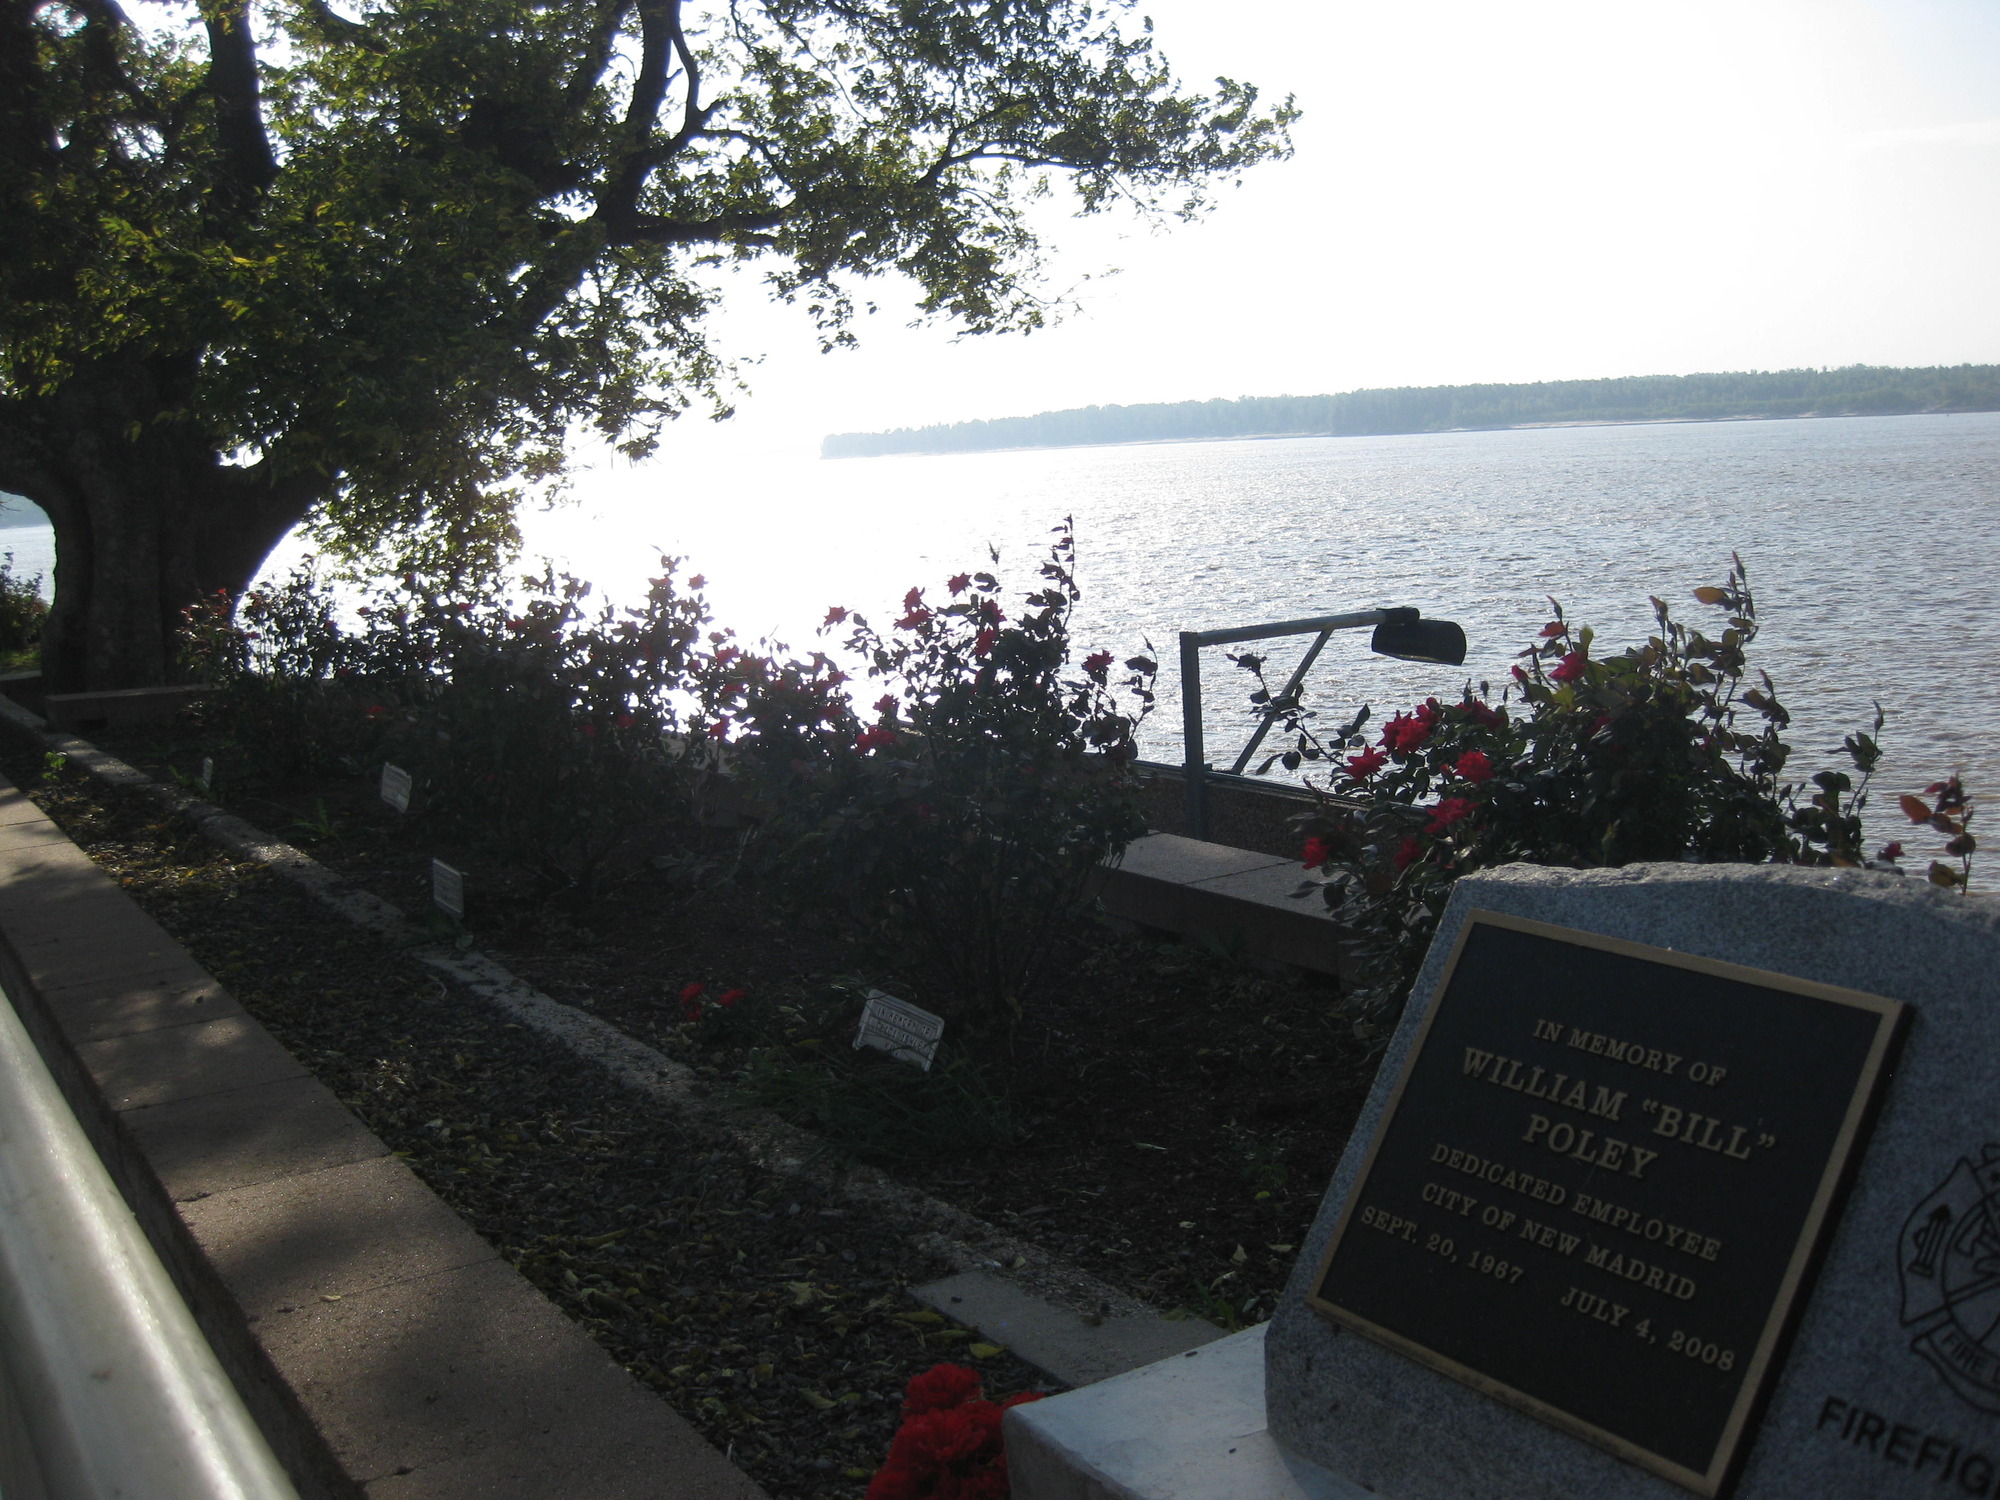 A memorial rose garden along the Mississippi River at the New Madrid Water Route in New Madrid, Missouri